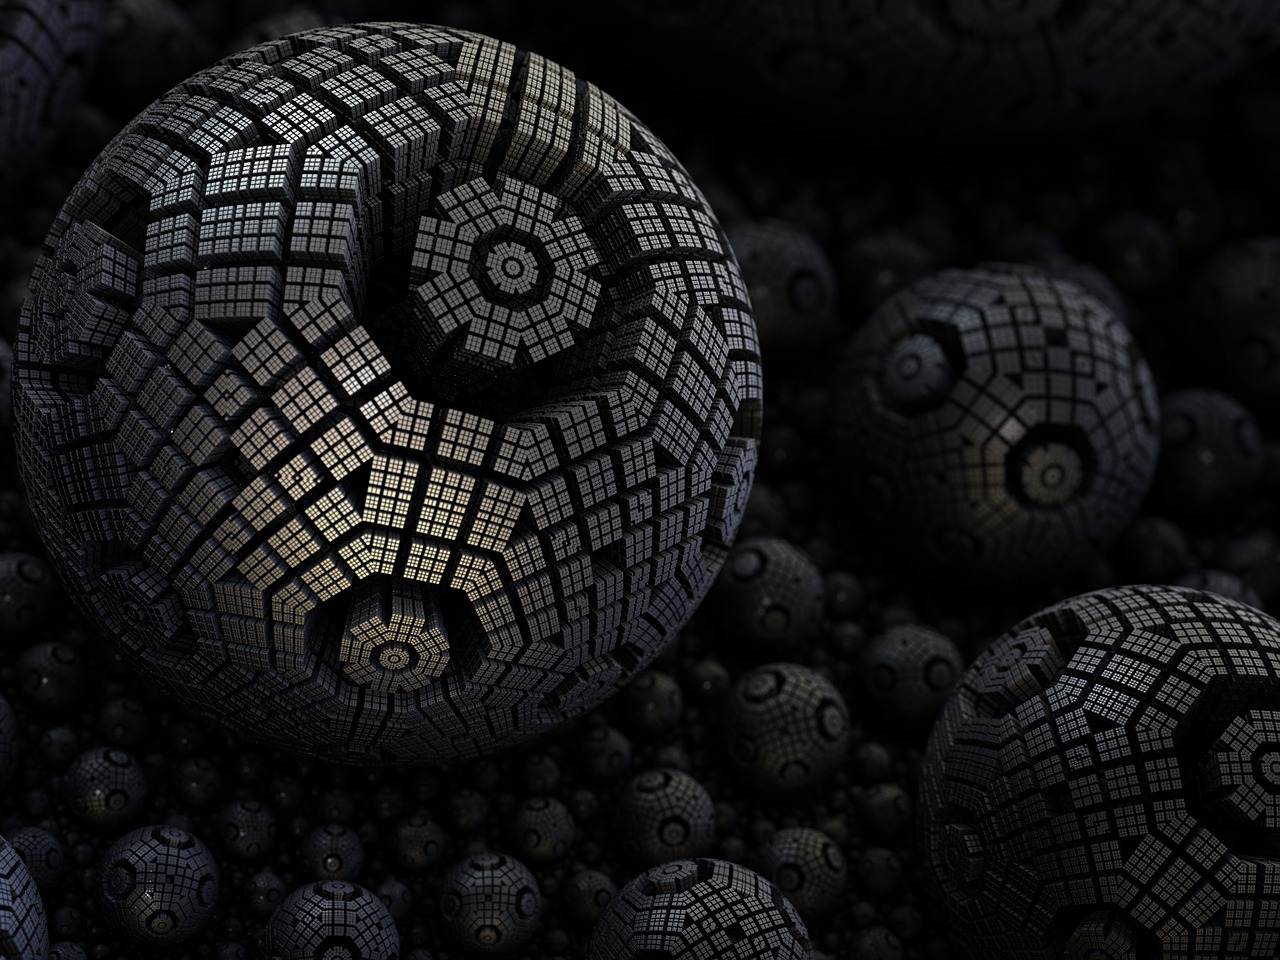 a bunch of balls sitting on top of a pile of black balls, by Artur Tarnowski, deviantart, fractal pattern background, borg cube, deathstar, many small details